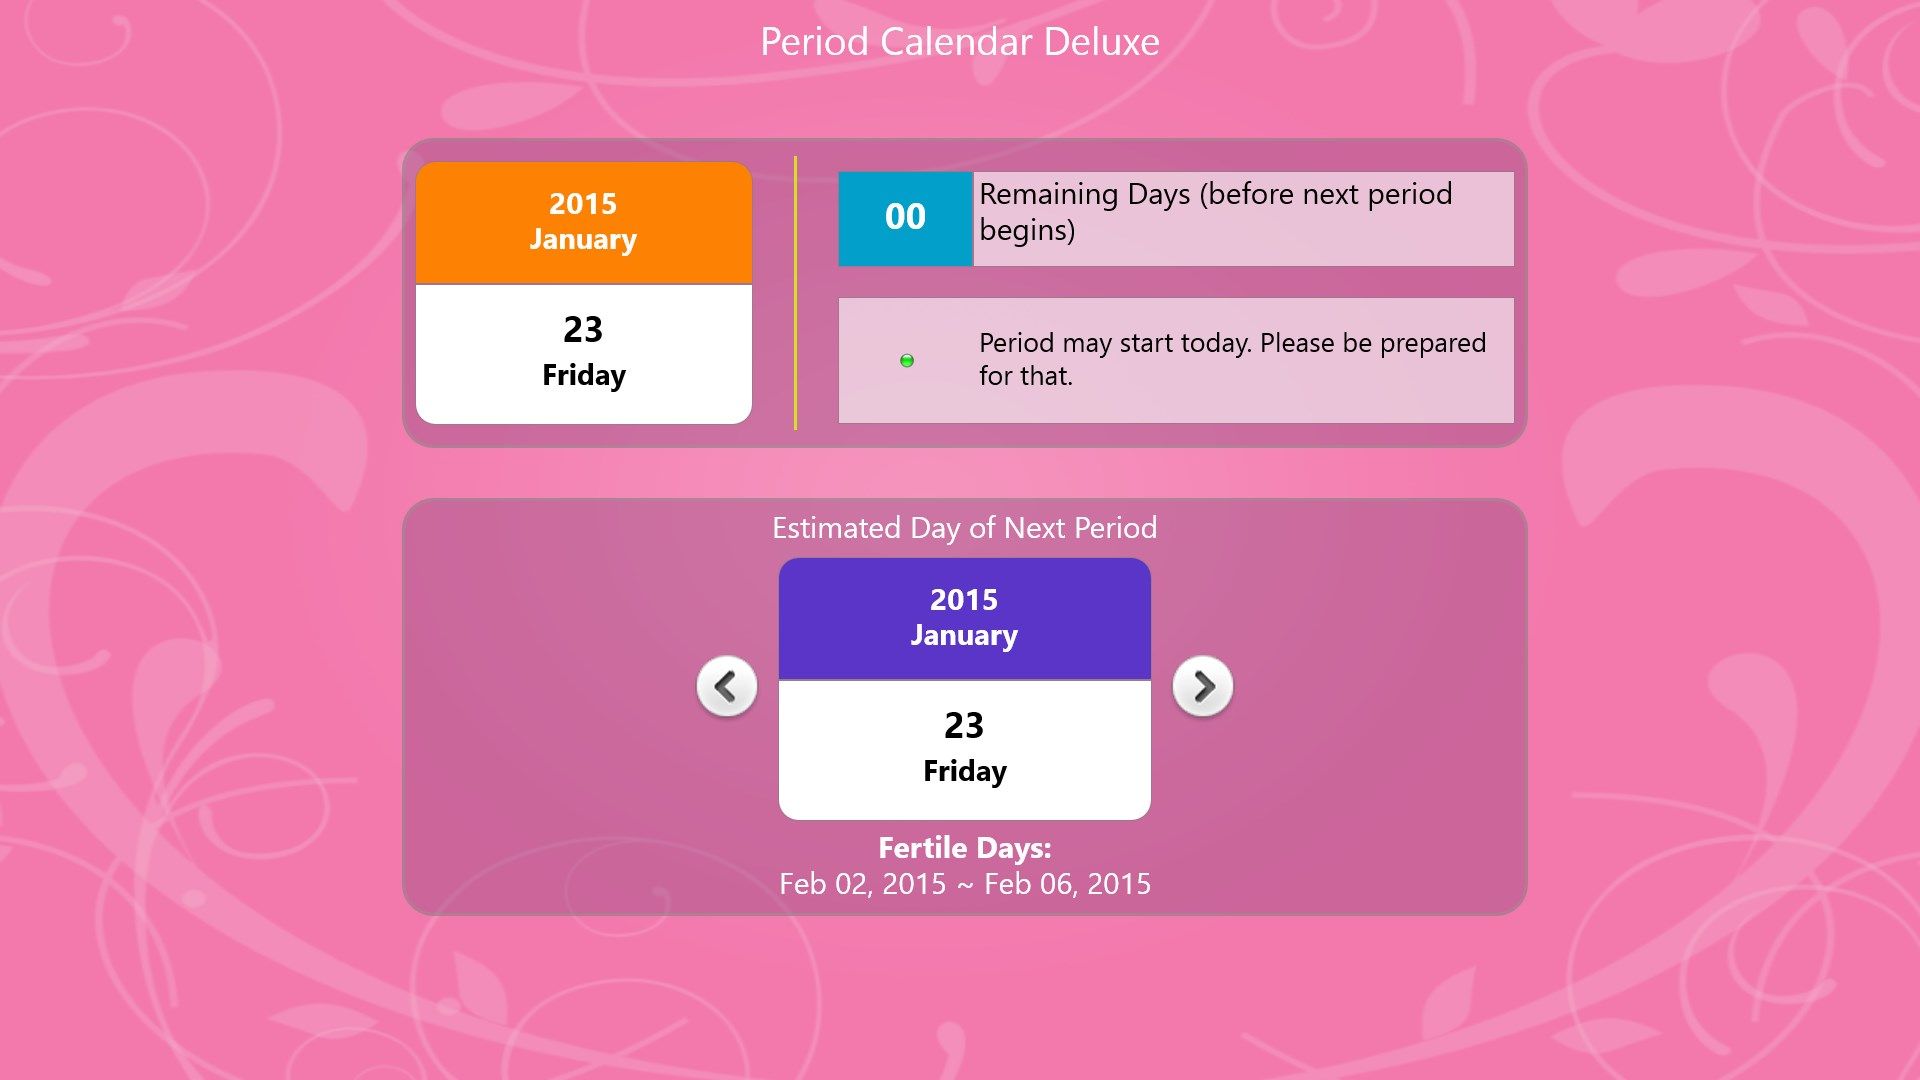 Main page - the details of your upcoming periods.